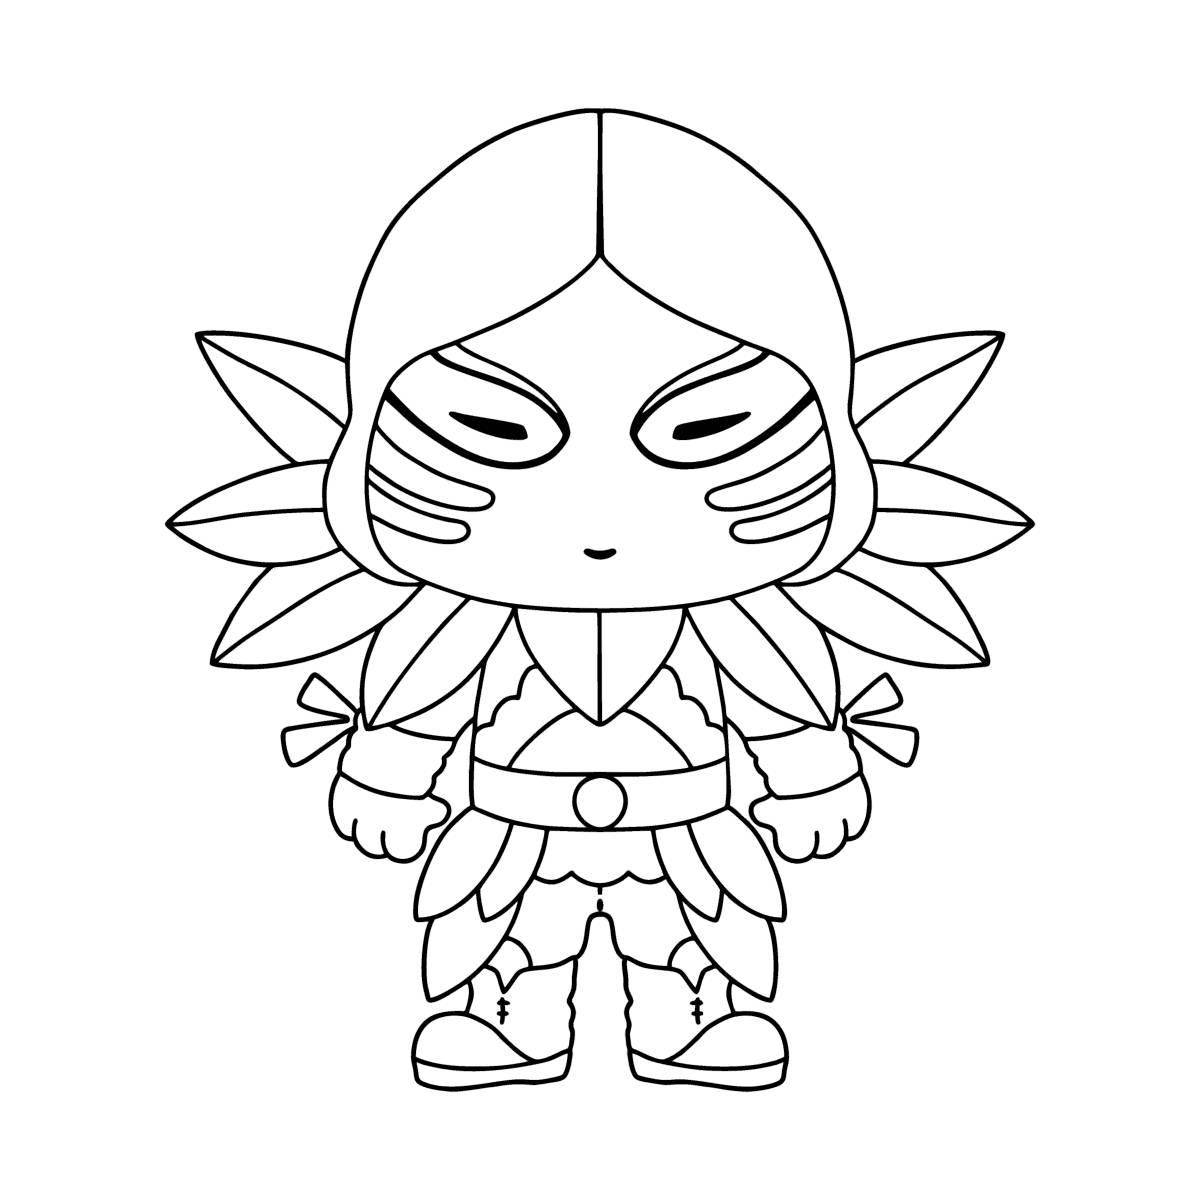 Coloring funko pop fortnite coloring page